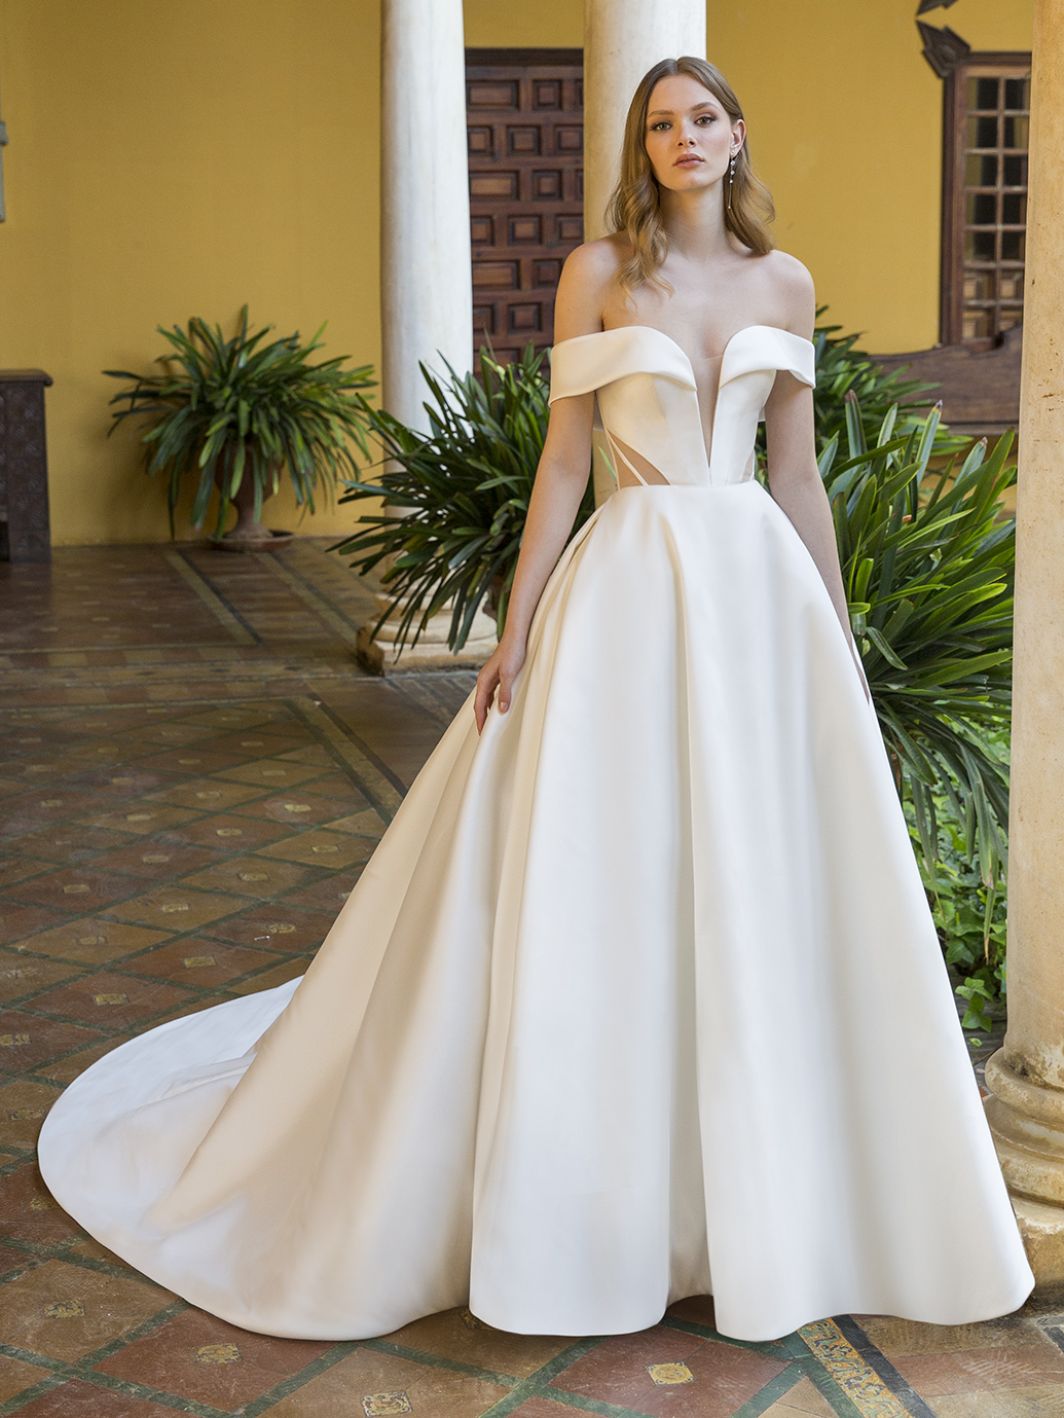 Modern Bridal Gown With Mikado Ball Gown Skirt Pearson by enzoani at K&B Bridals bridal shop in baltimore